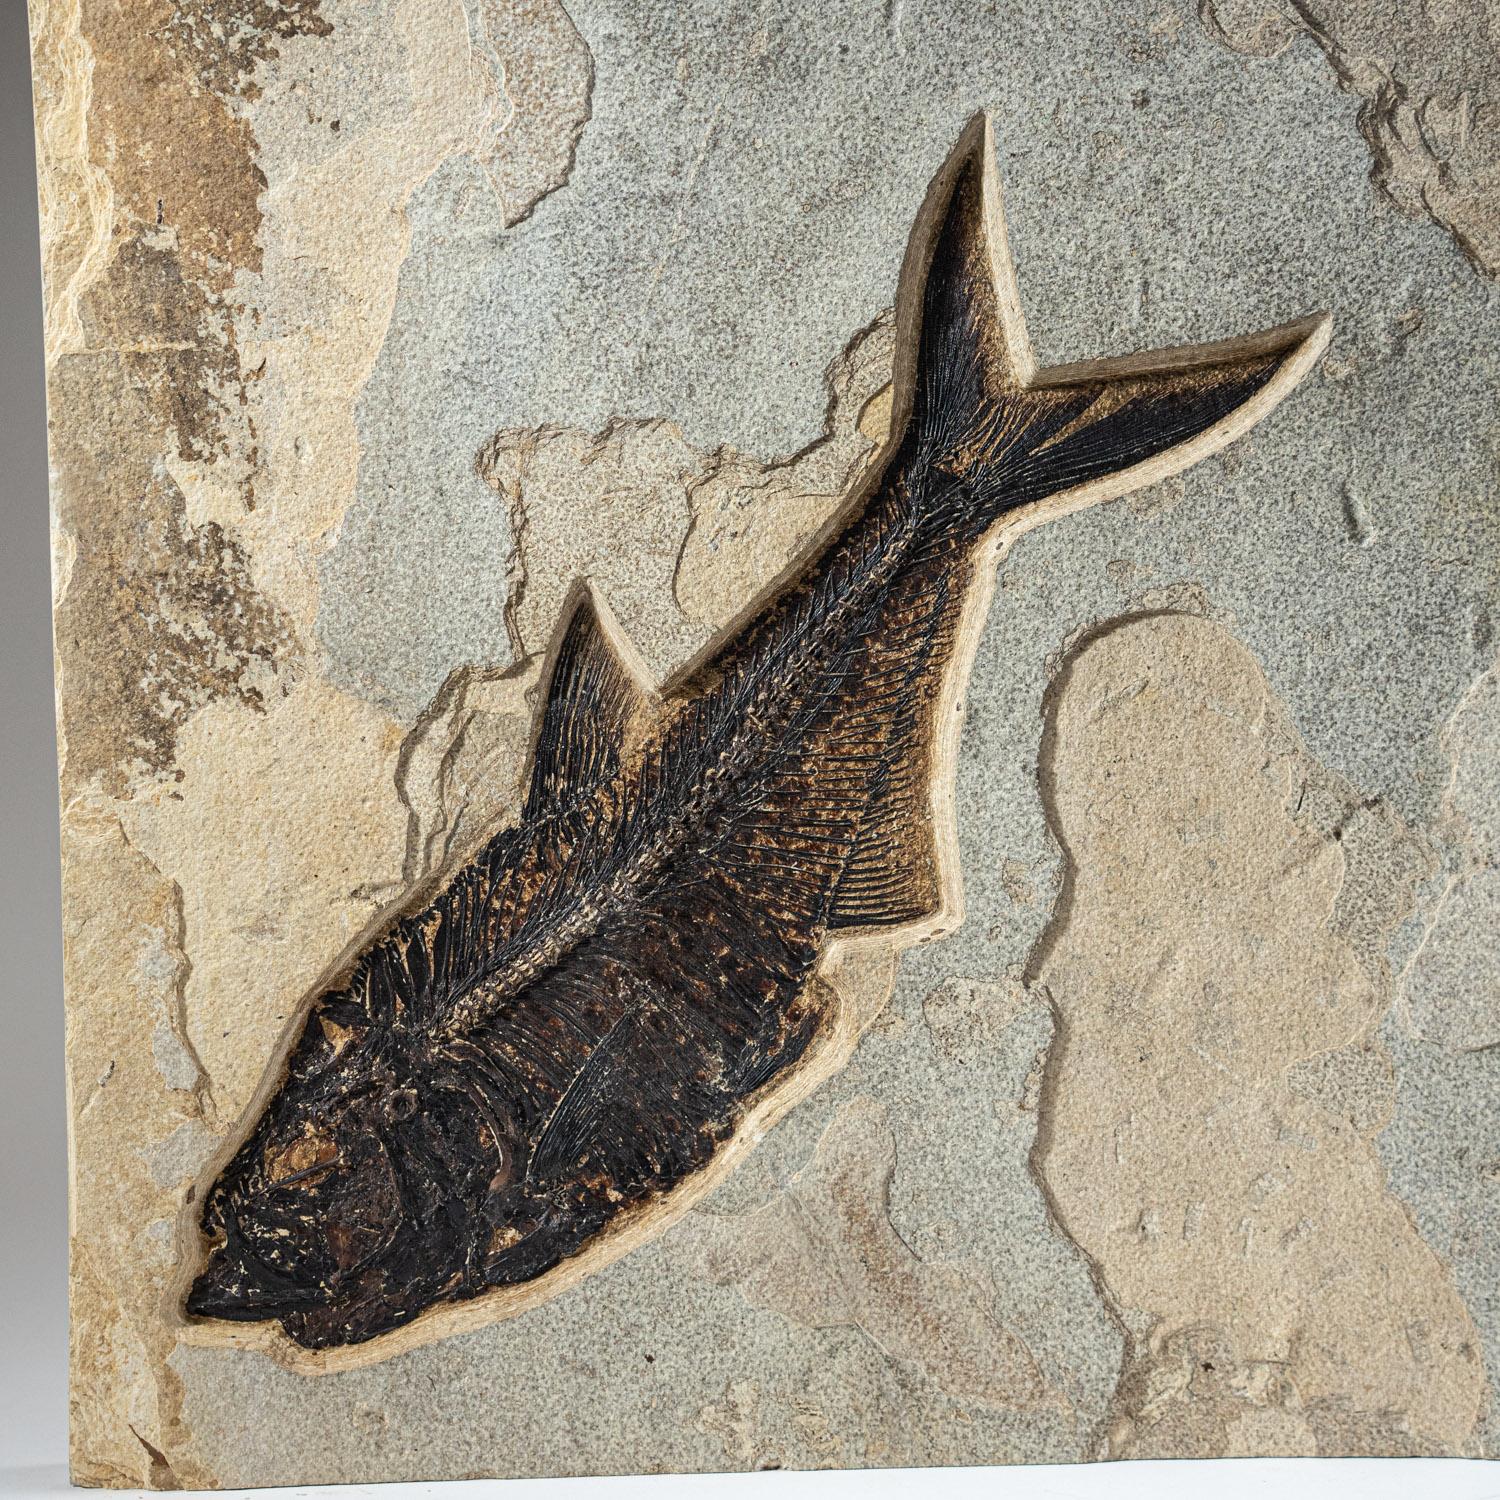 18th Century and Earlier Natural Giant Diplomytus Fish Fossil Plate (60.2 lbs) For Sale